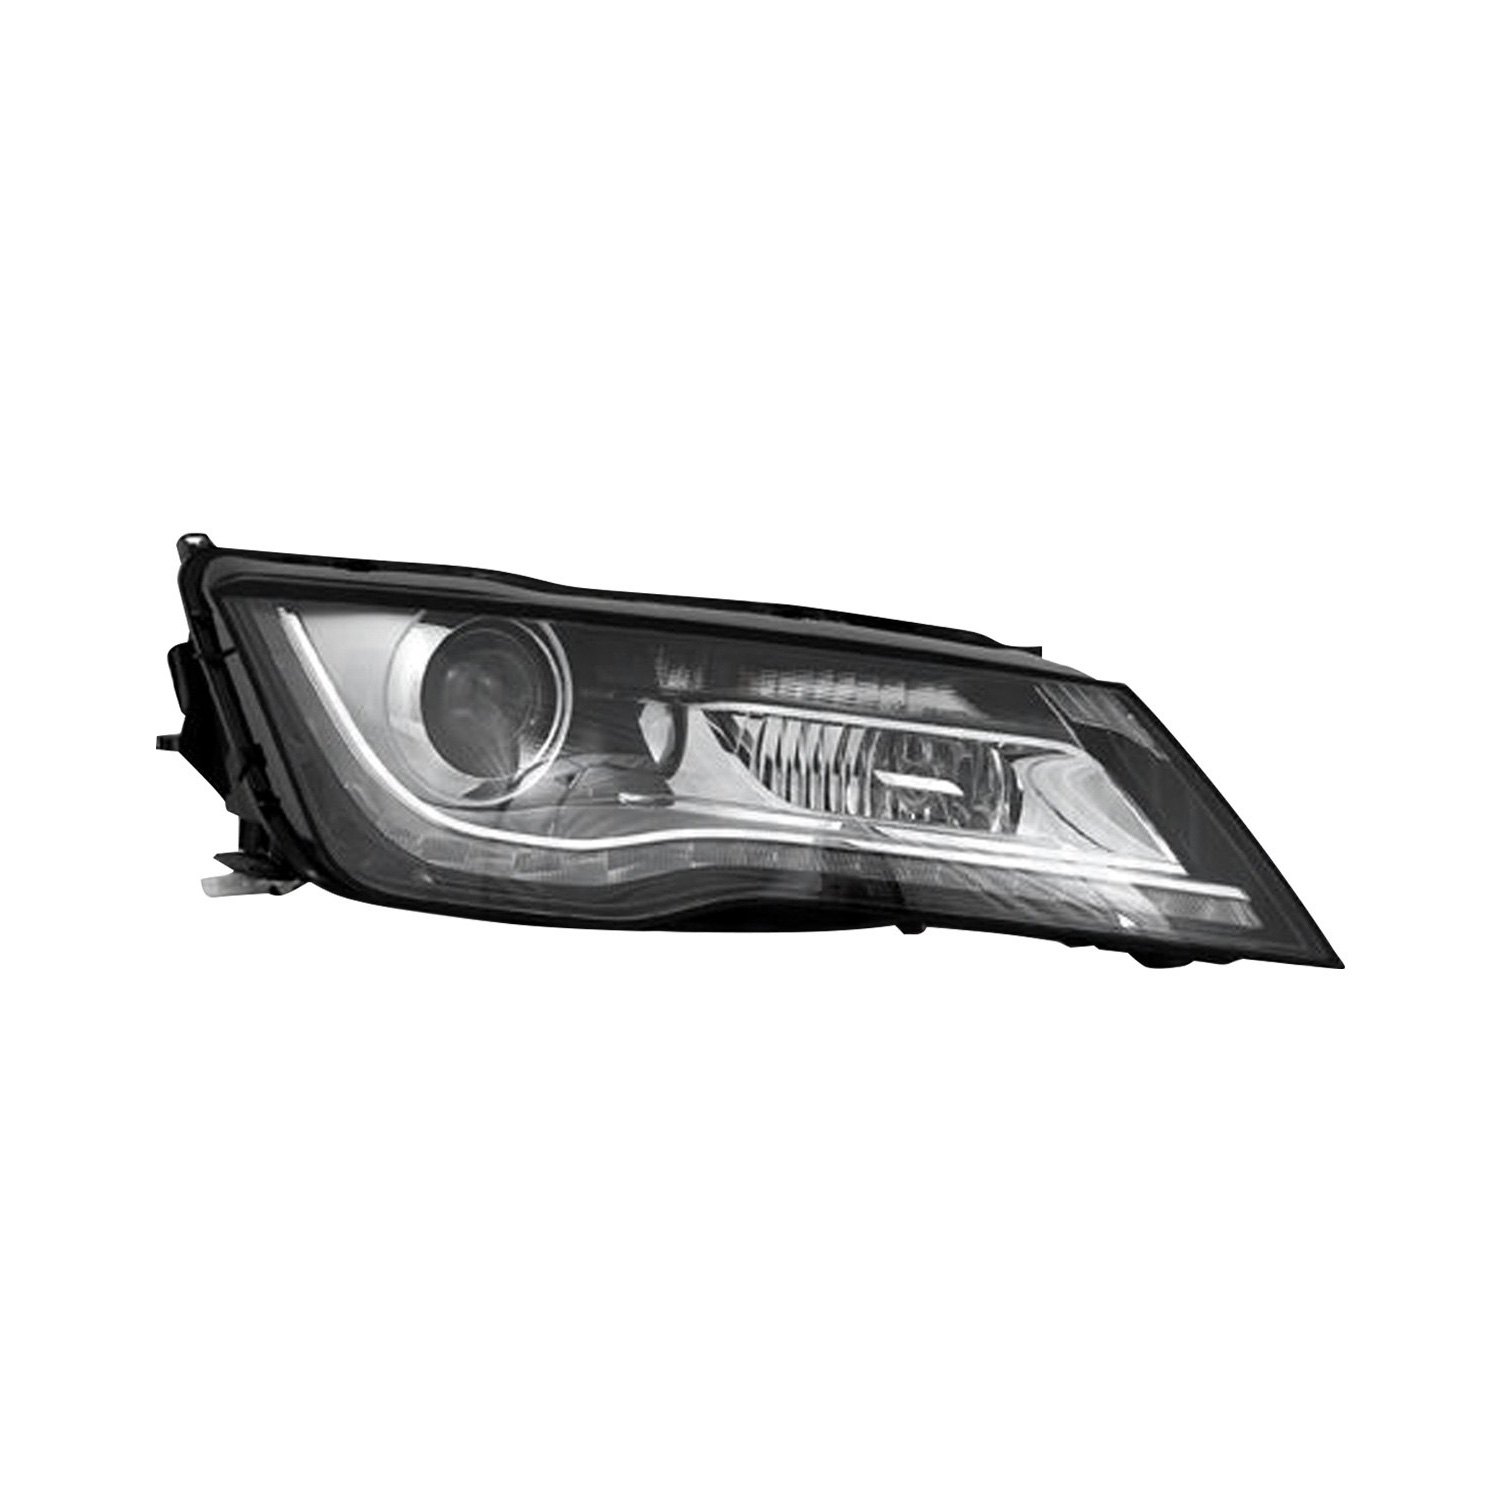 Replace® Audi A7 2012 Replacement Headlight